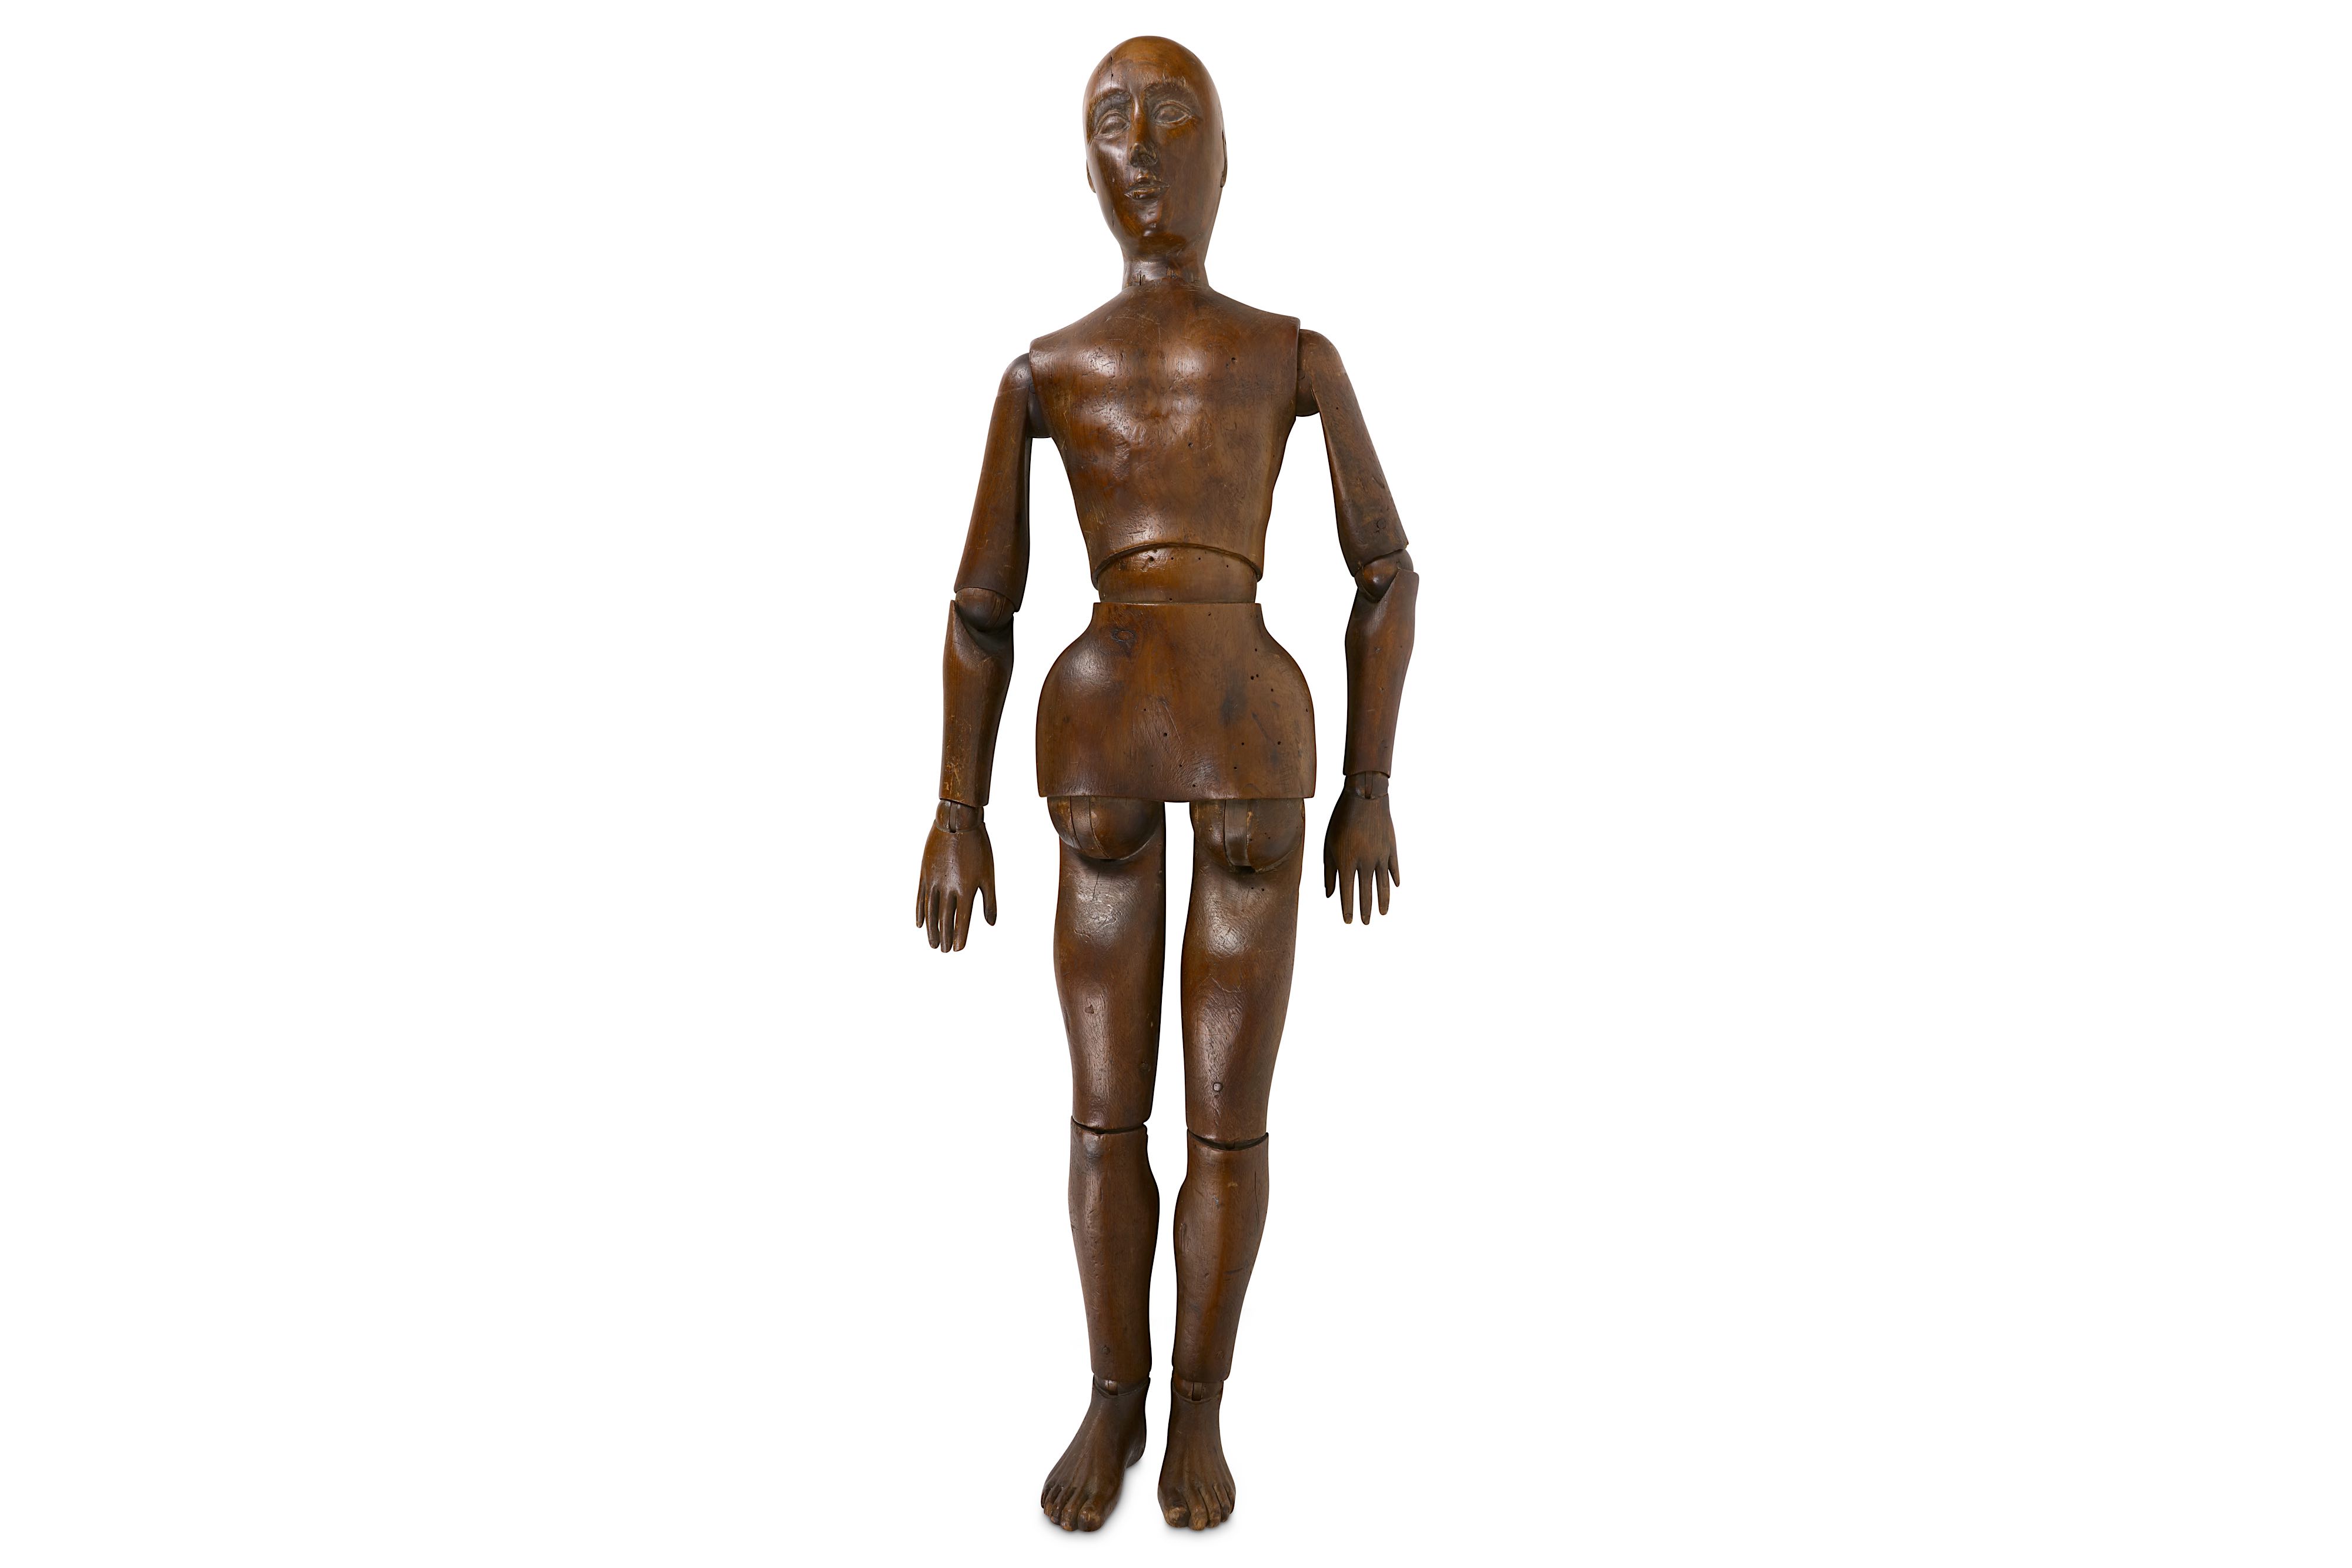 AN EARLY 20TH CENTURY CARVED AND STAINED WOOD LAY FIGURE OR ARTIST'S MANNEQUIN - Image 2 of 4